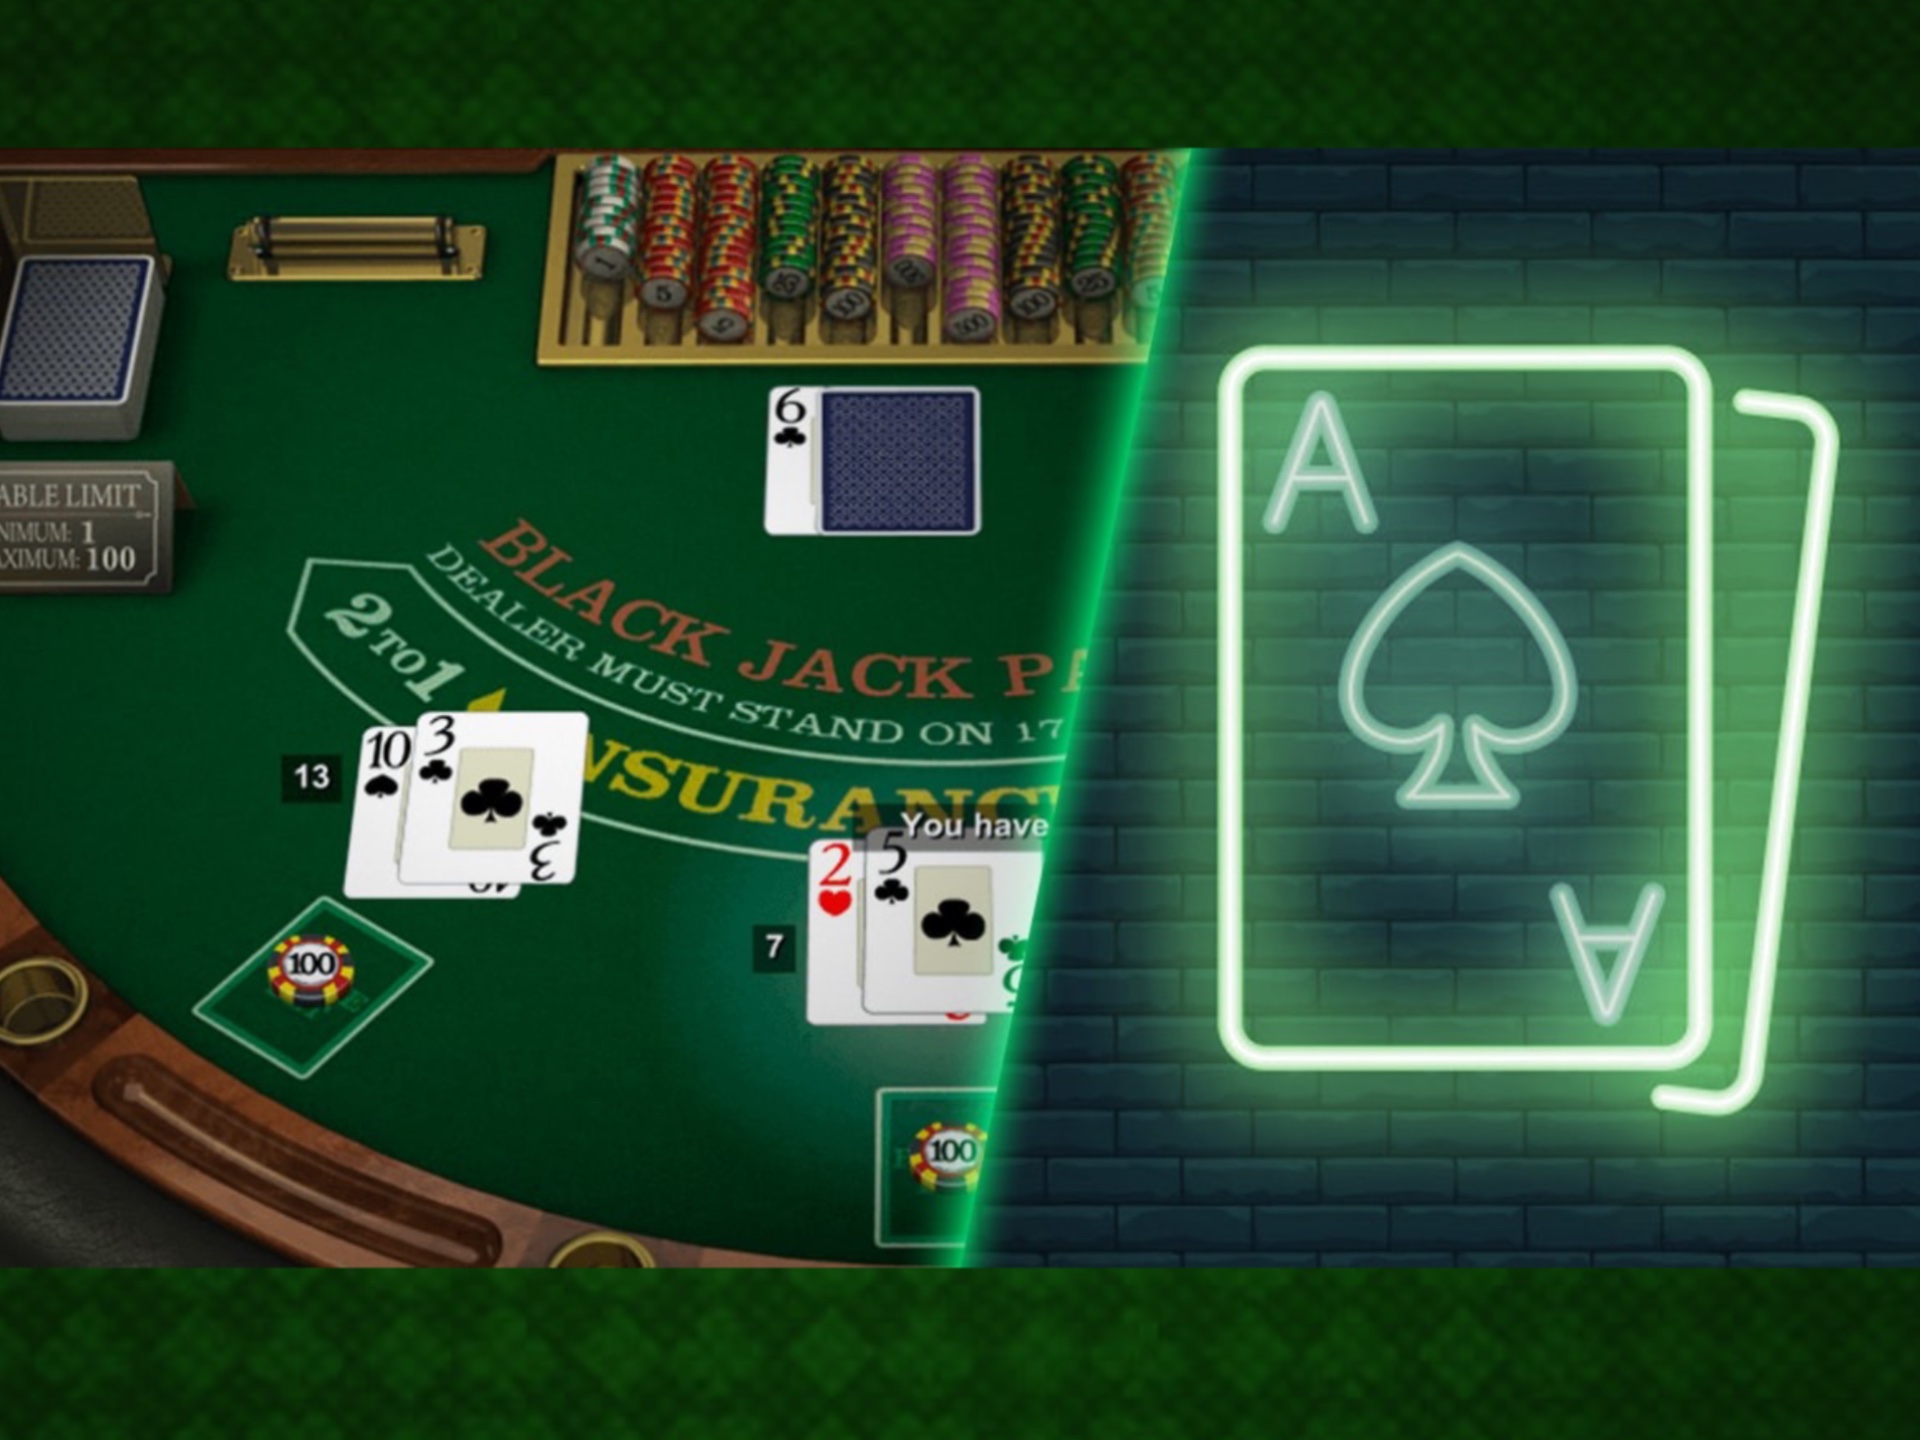 Register at an online casino an play blackjack and other online casino games.